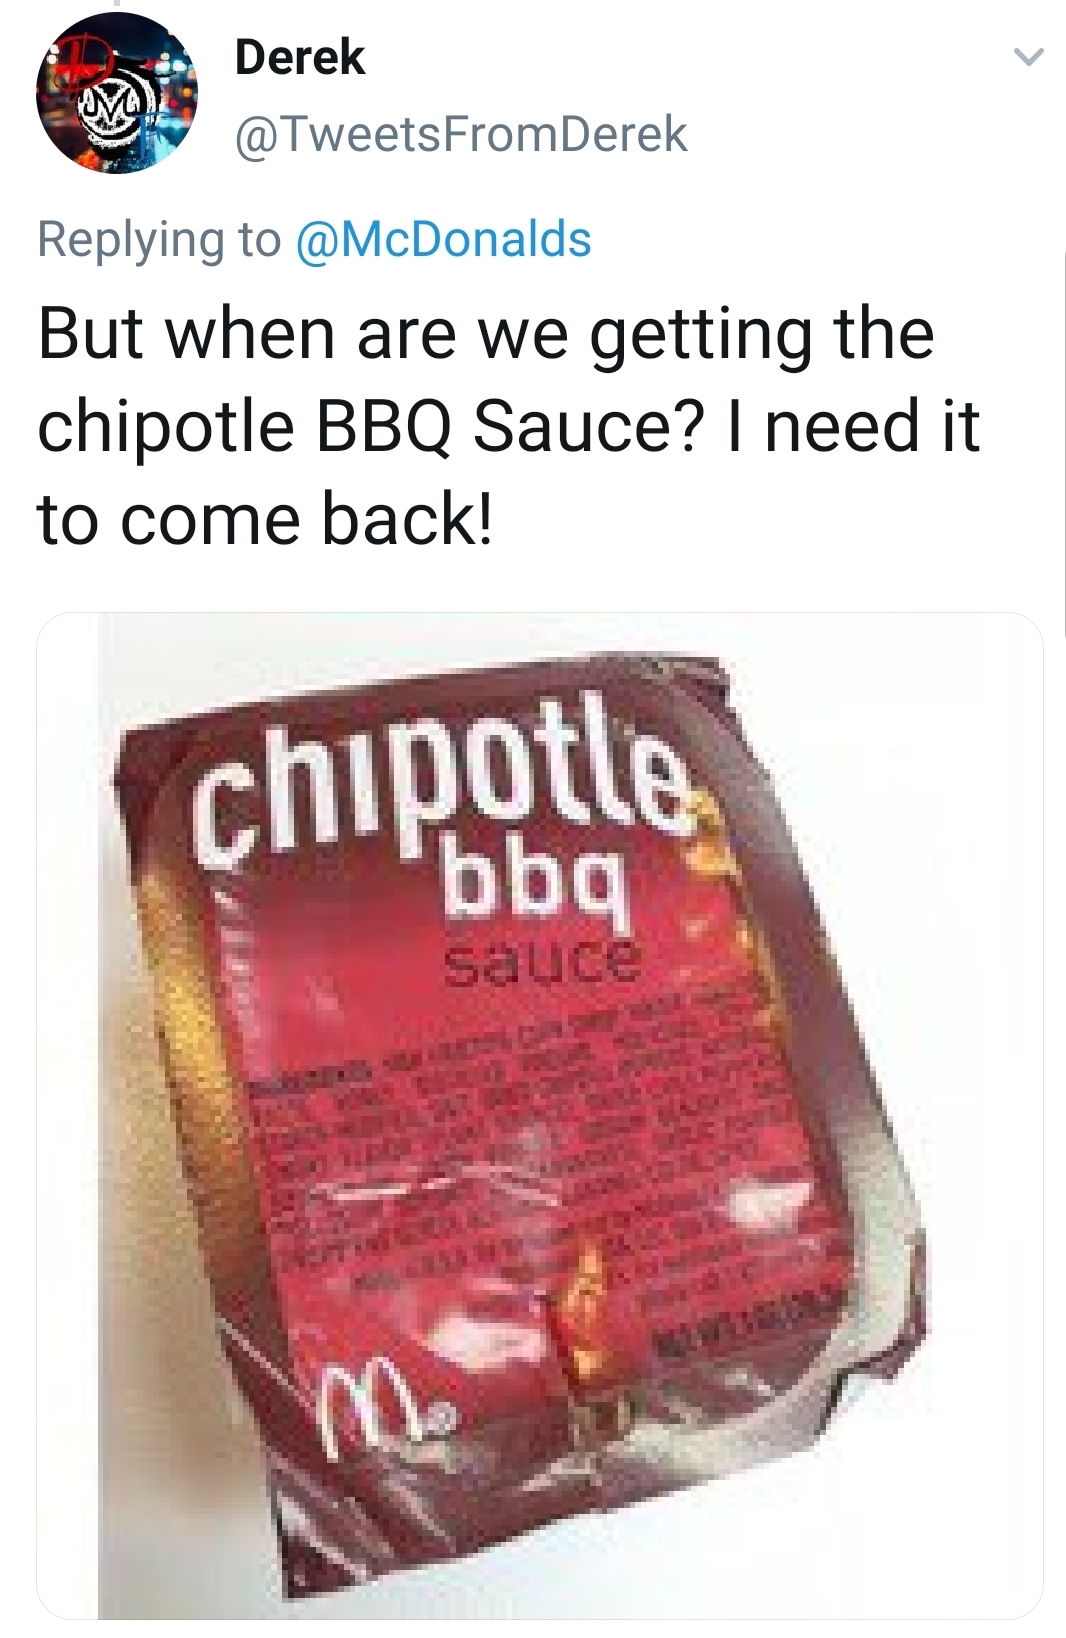 McDonald’s Chipotle BBQ Sauce – Where Can You Buy This Sauce?